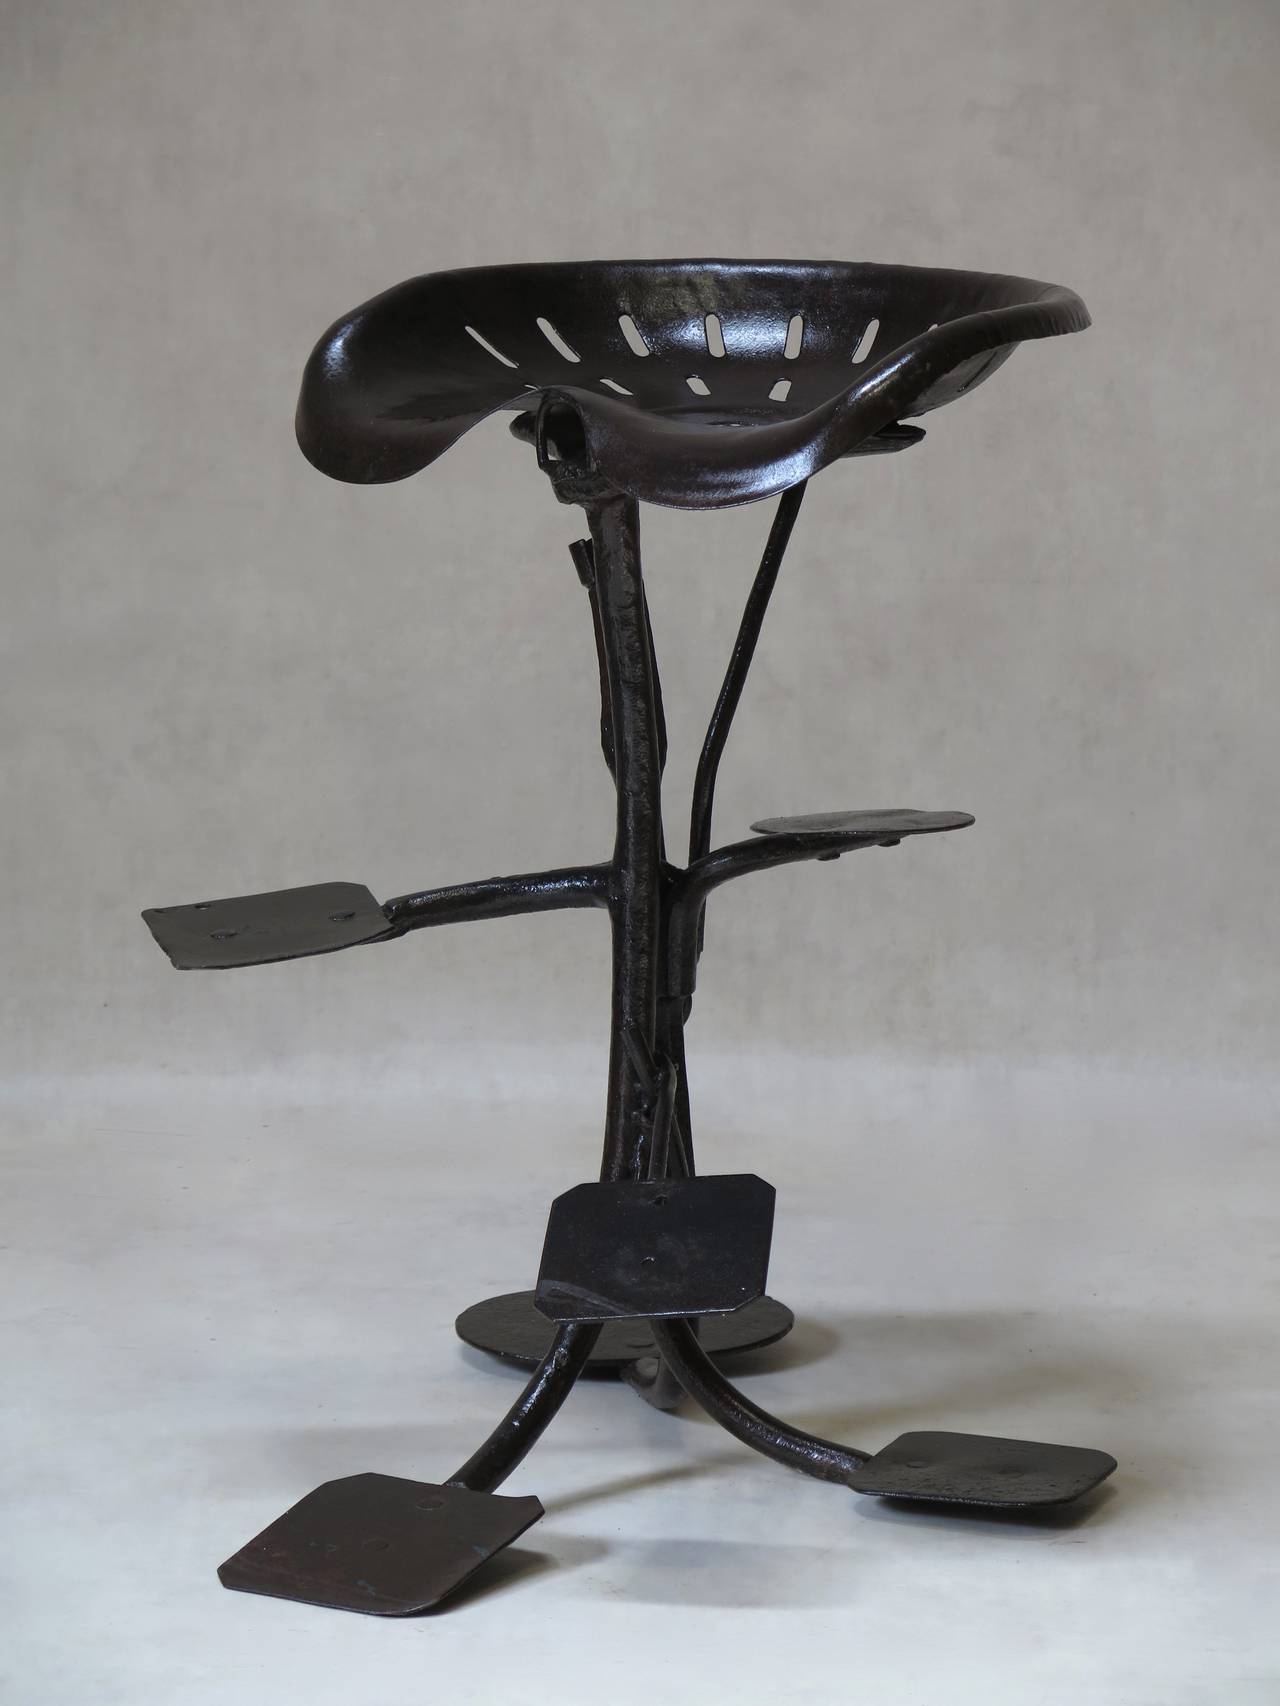 Unique sculpturesque artist's stool made out of assembled wrought iron tractor parts.